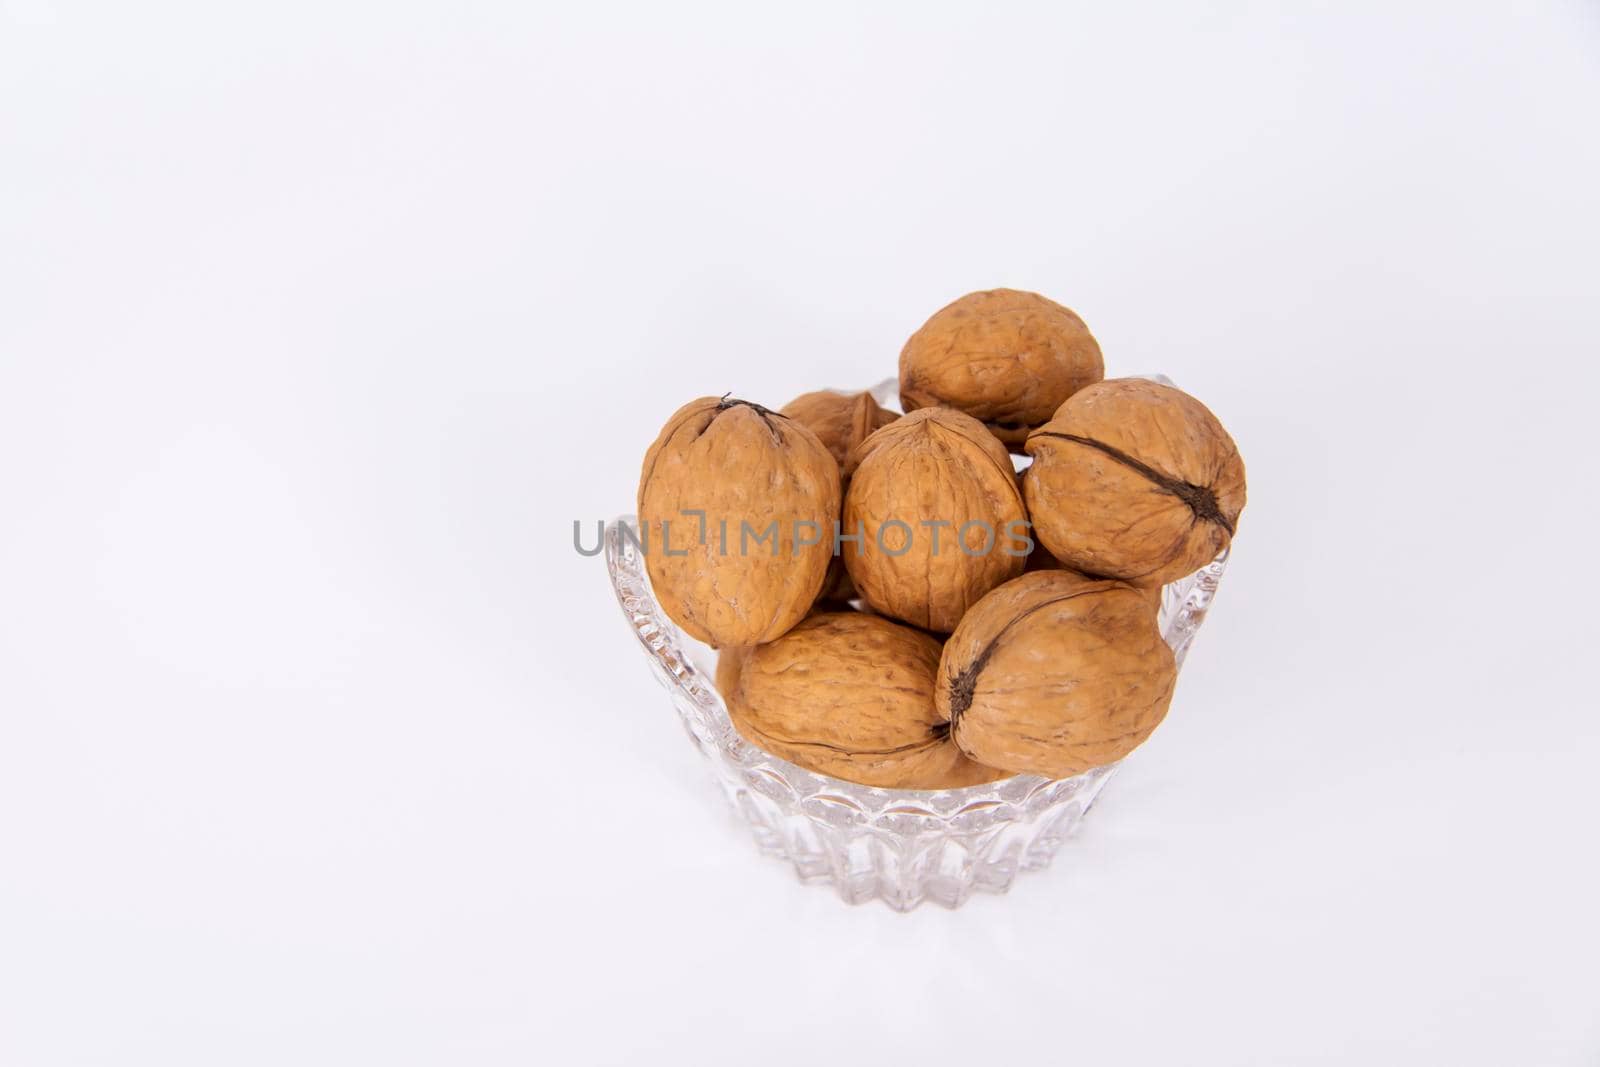 Walnuts in a shell on a white background in a crystal vase. Healthy nuts. Walnuts.